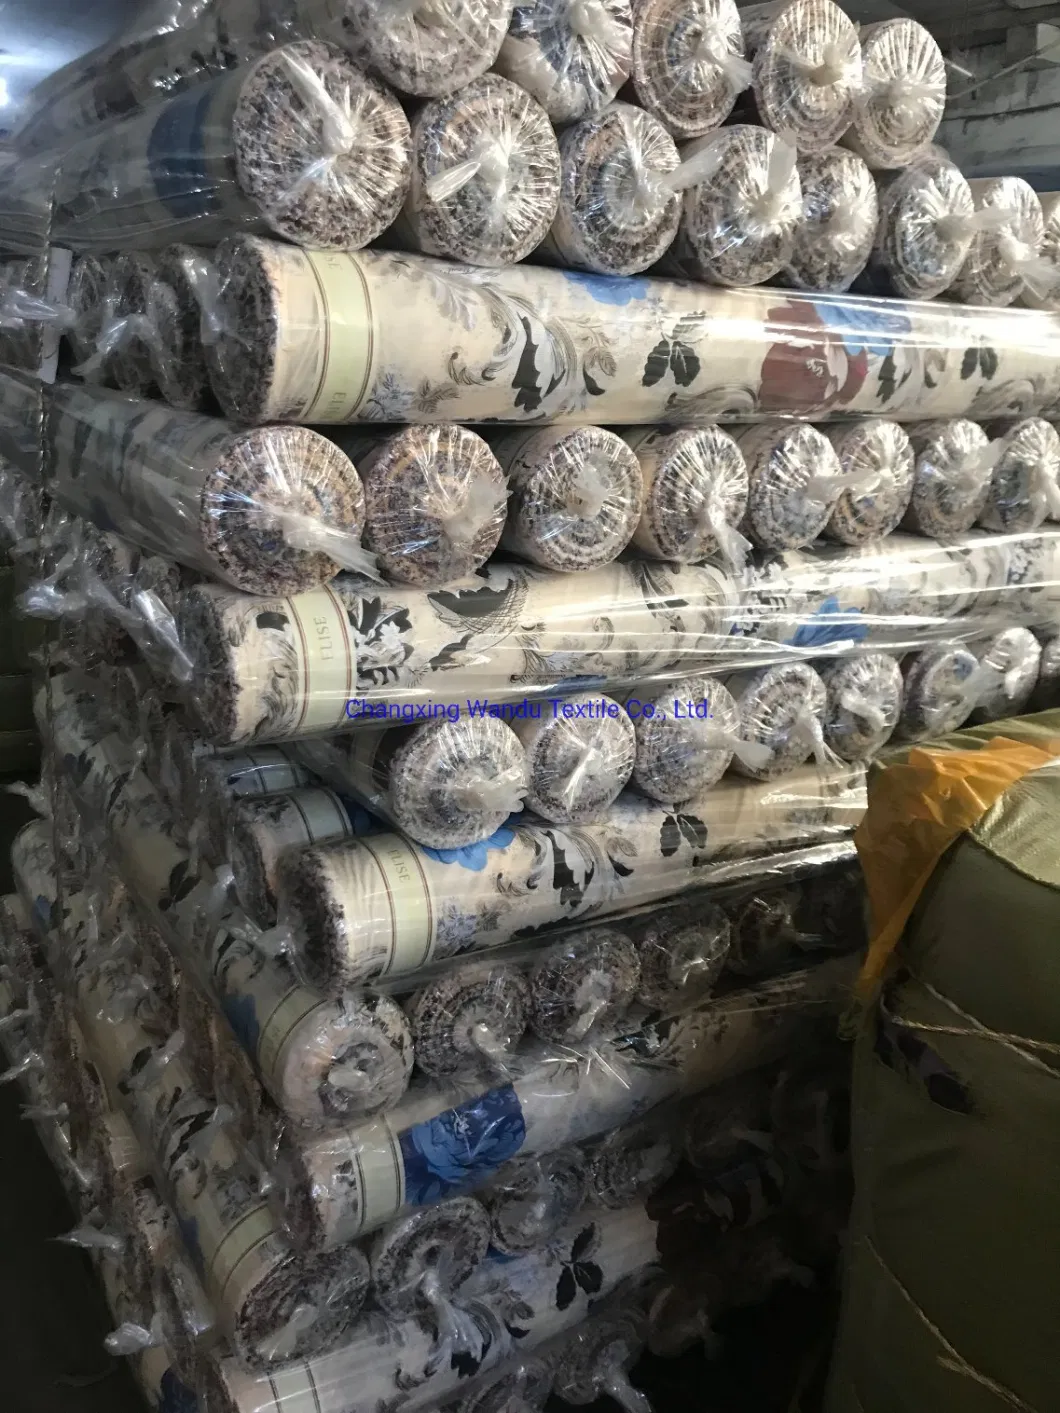 Textile Wholesale, Printed Bedsheet Fabric, Polyester Fiber Cloth